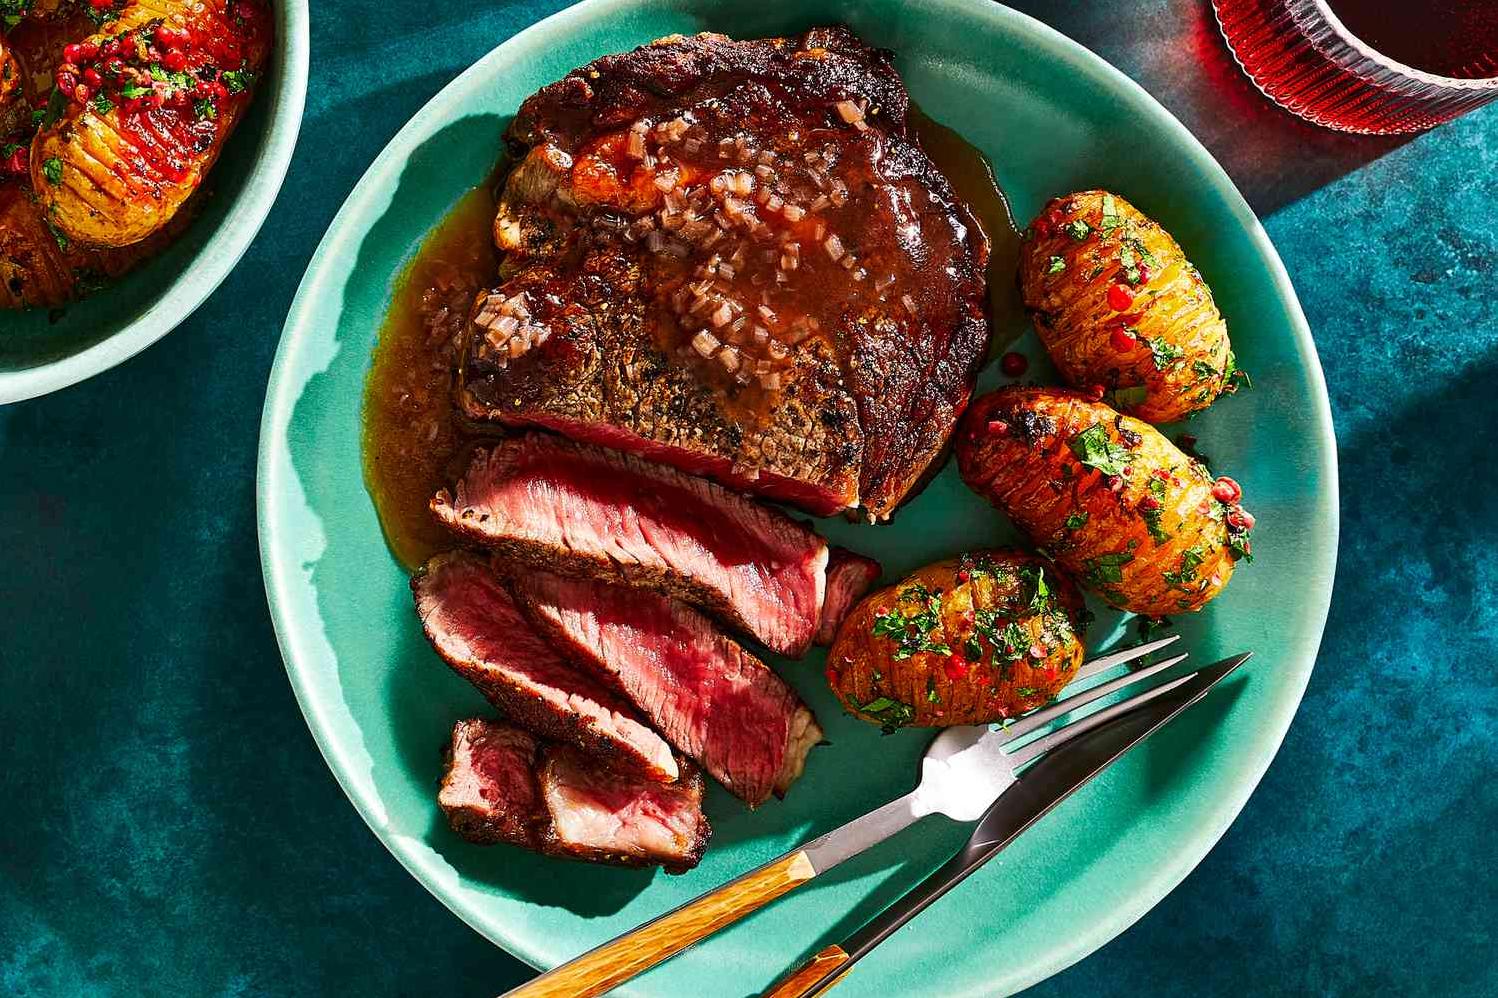  Dinner is served: steak and red wine sauce, a match made in culinary heaven